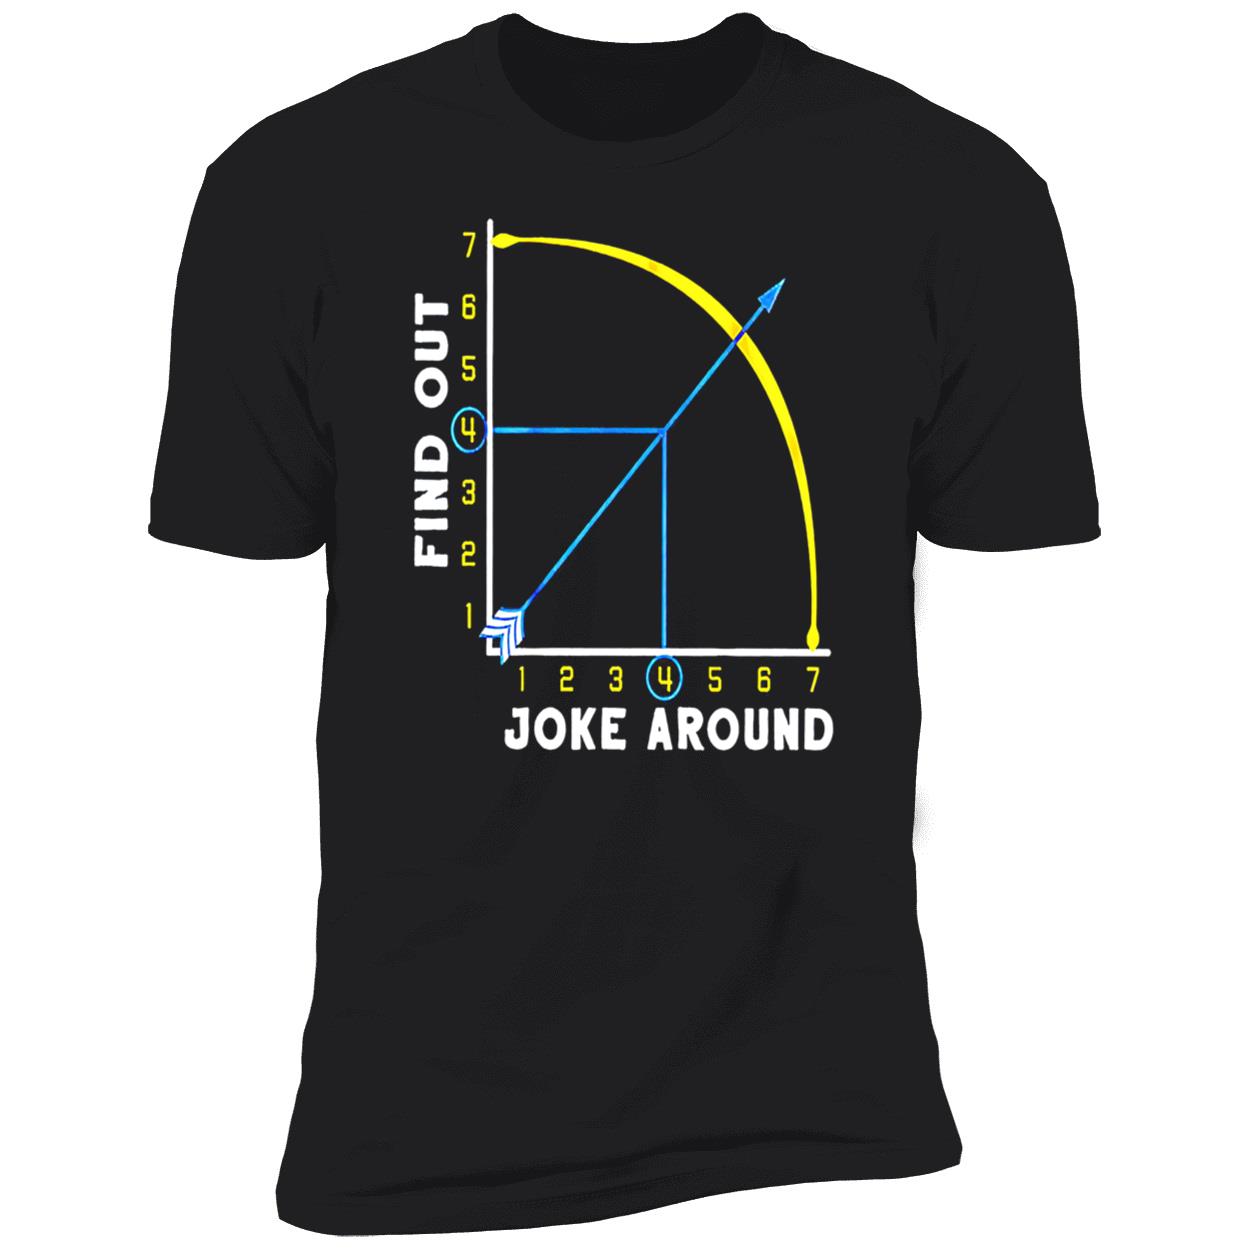 Joke Around And Find Out Shirt